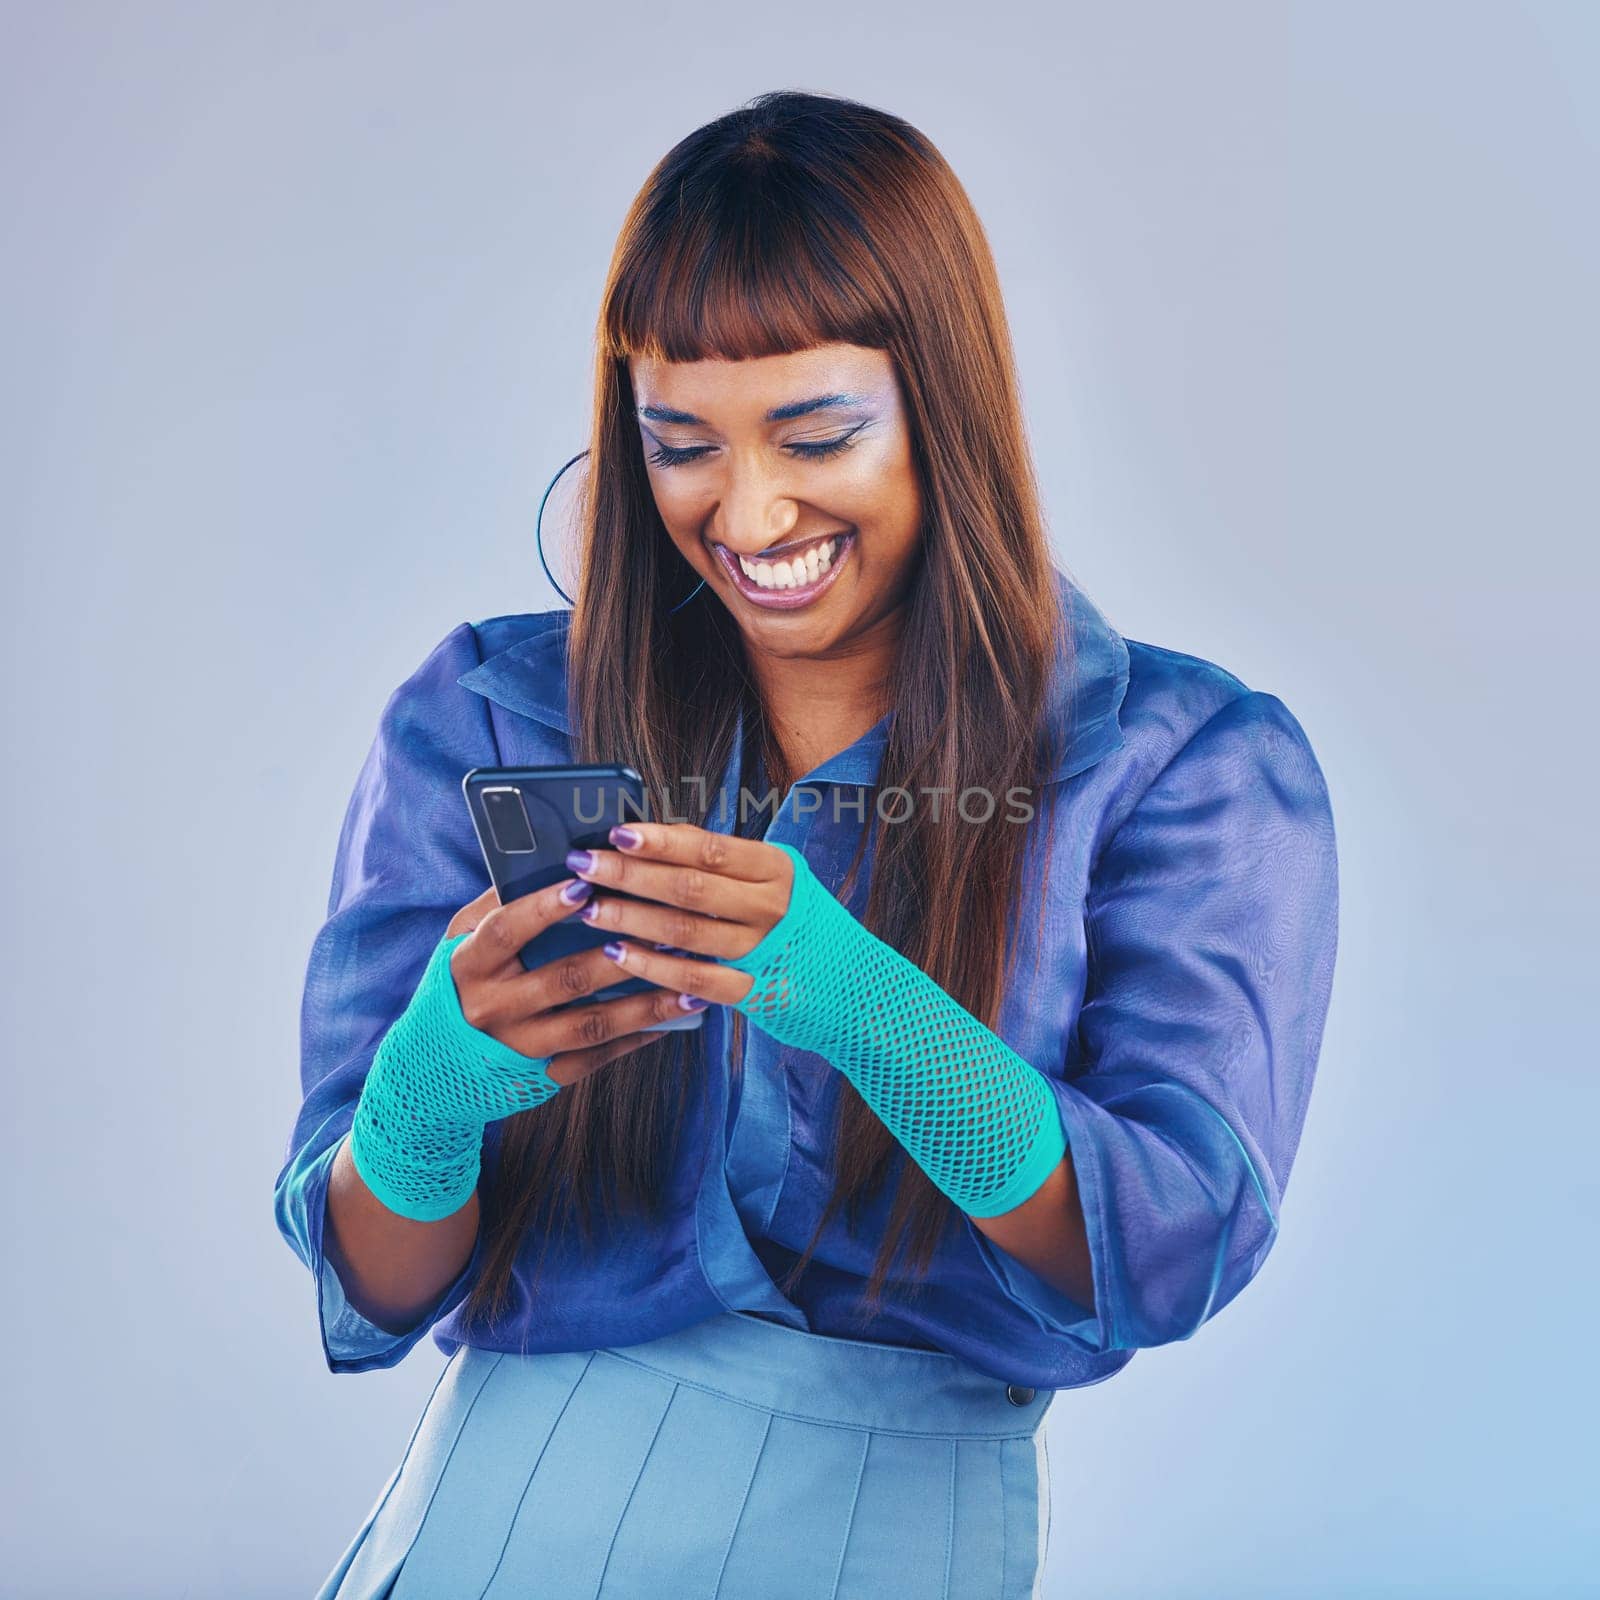 Woman, phone and laughing for funny joke, meme or social media isolated against a studio background. Happy female model smiling and laugh in fashion on mobile smartphone for networking with fun humor by YuriArcurs